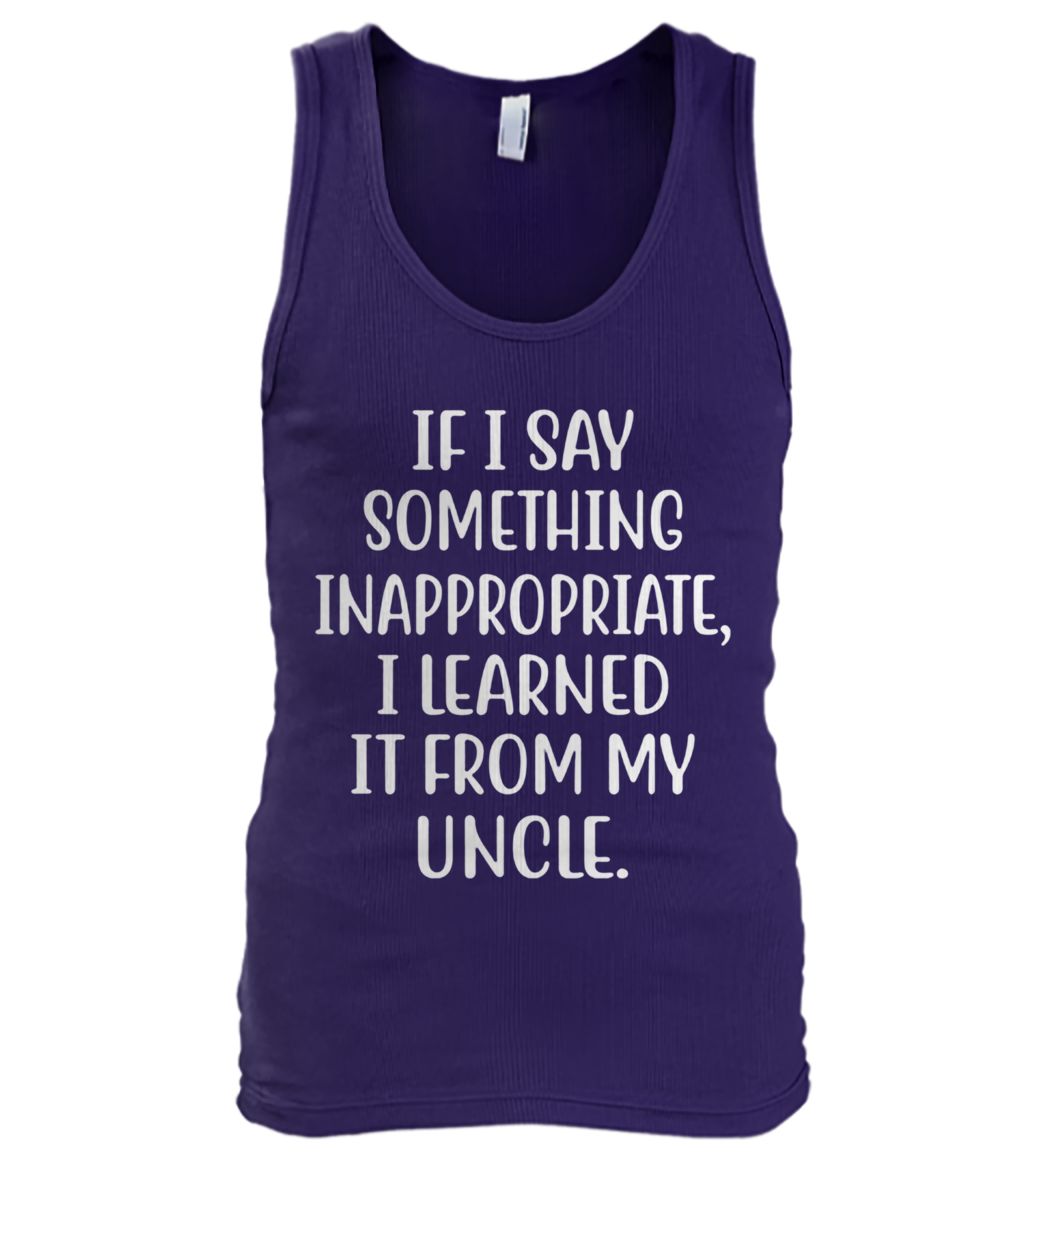 If I say something inappropriate I learned from uncle men's tank top